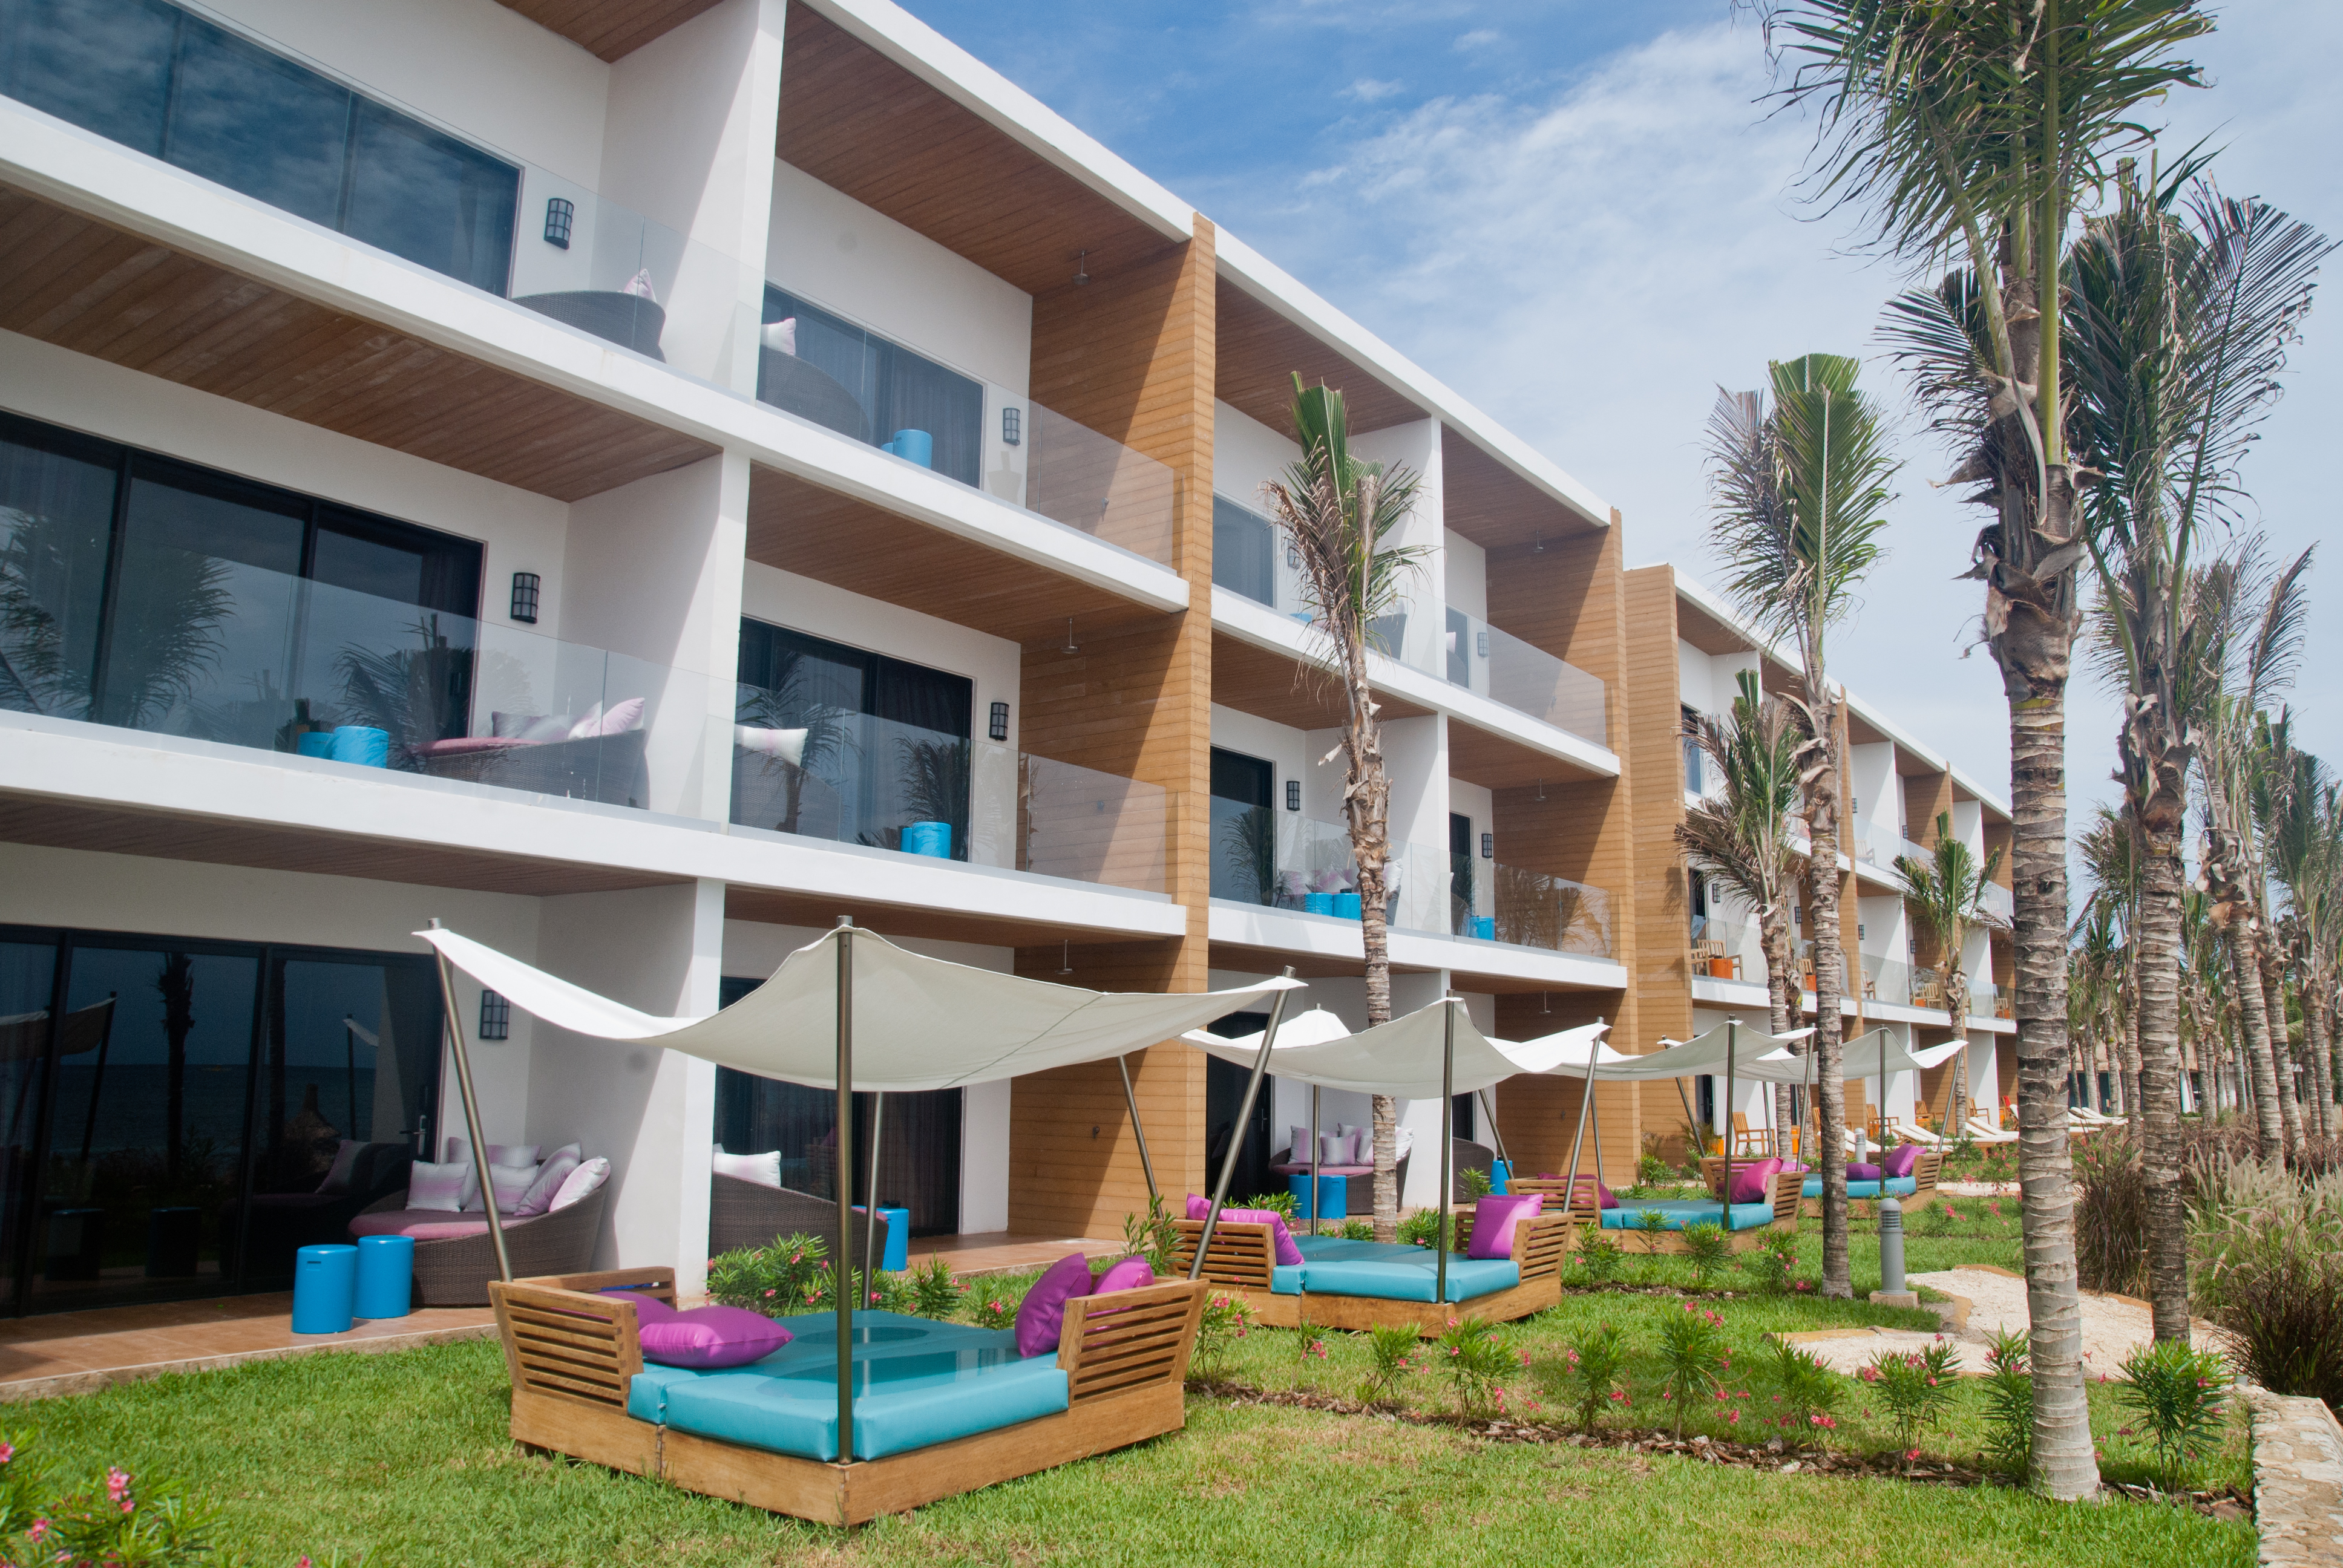 Club Med Cancun | Best Family-Friendly All-Inclusive Resort in Cancun Mexico | Aguamarina Family Rooms at Club Med Cancun